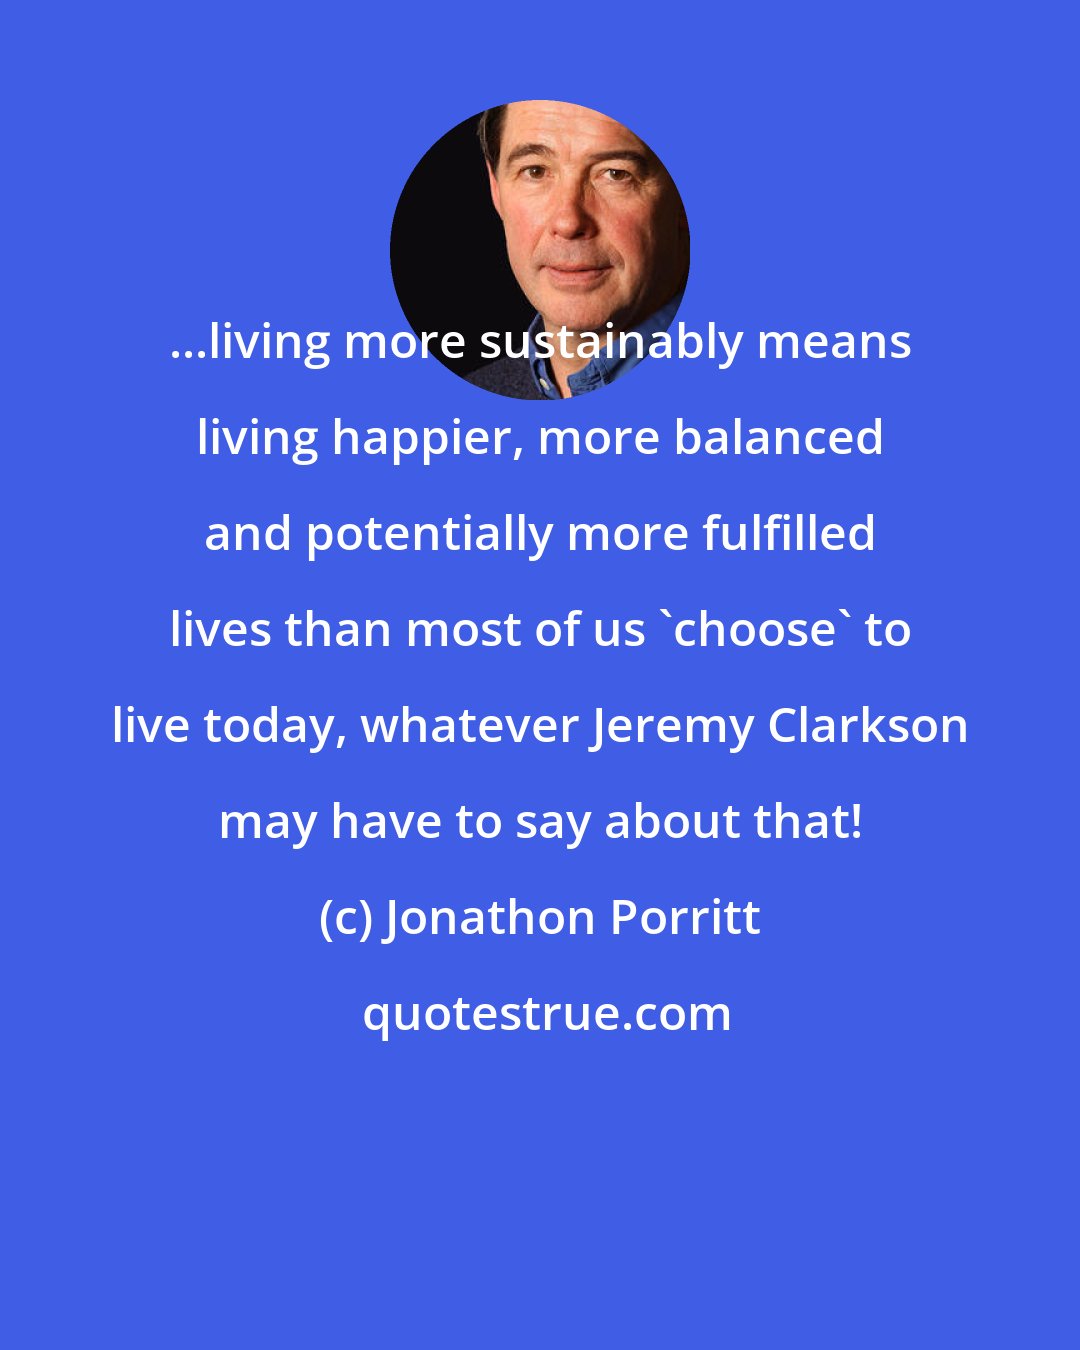 Jonathon Porritt: ...living more sustainably means living happier, more balanced and potentially more fulfilled lives than most of us 'choose' to live today, whatever Jeremy Clarkson may have to say about that!